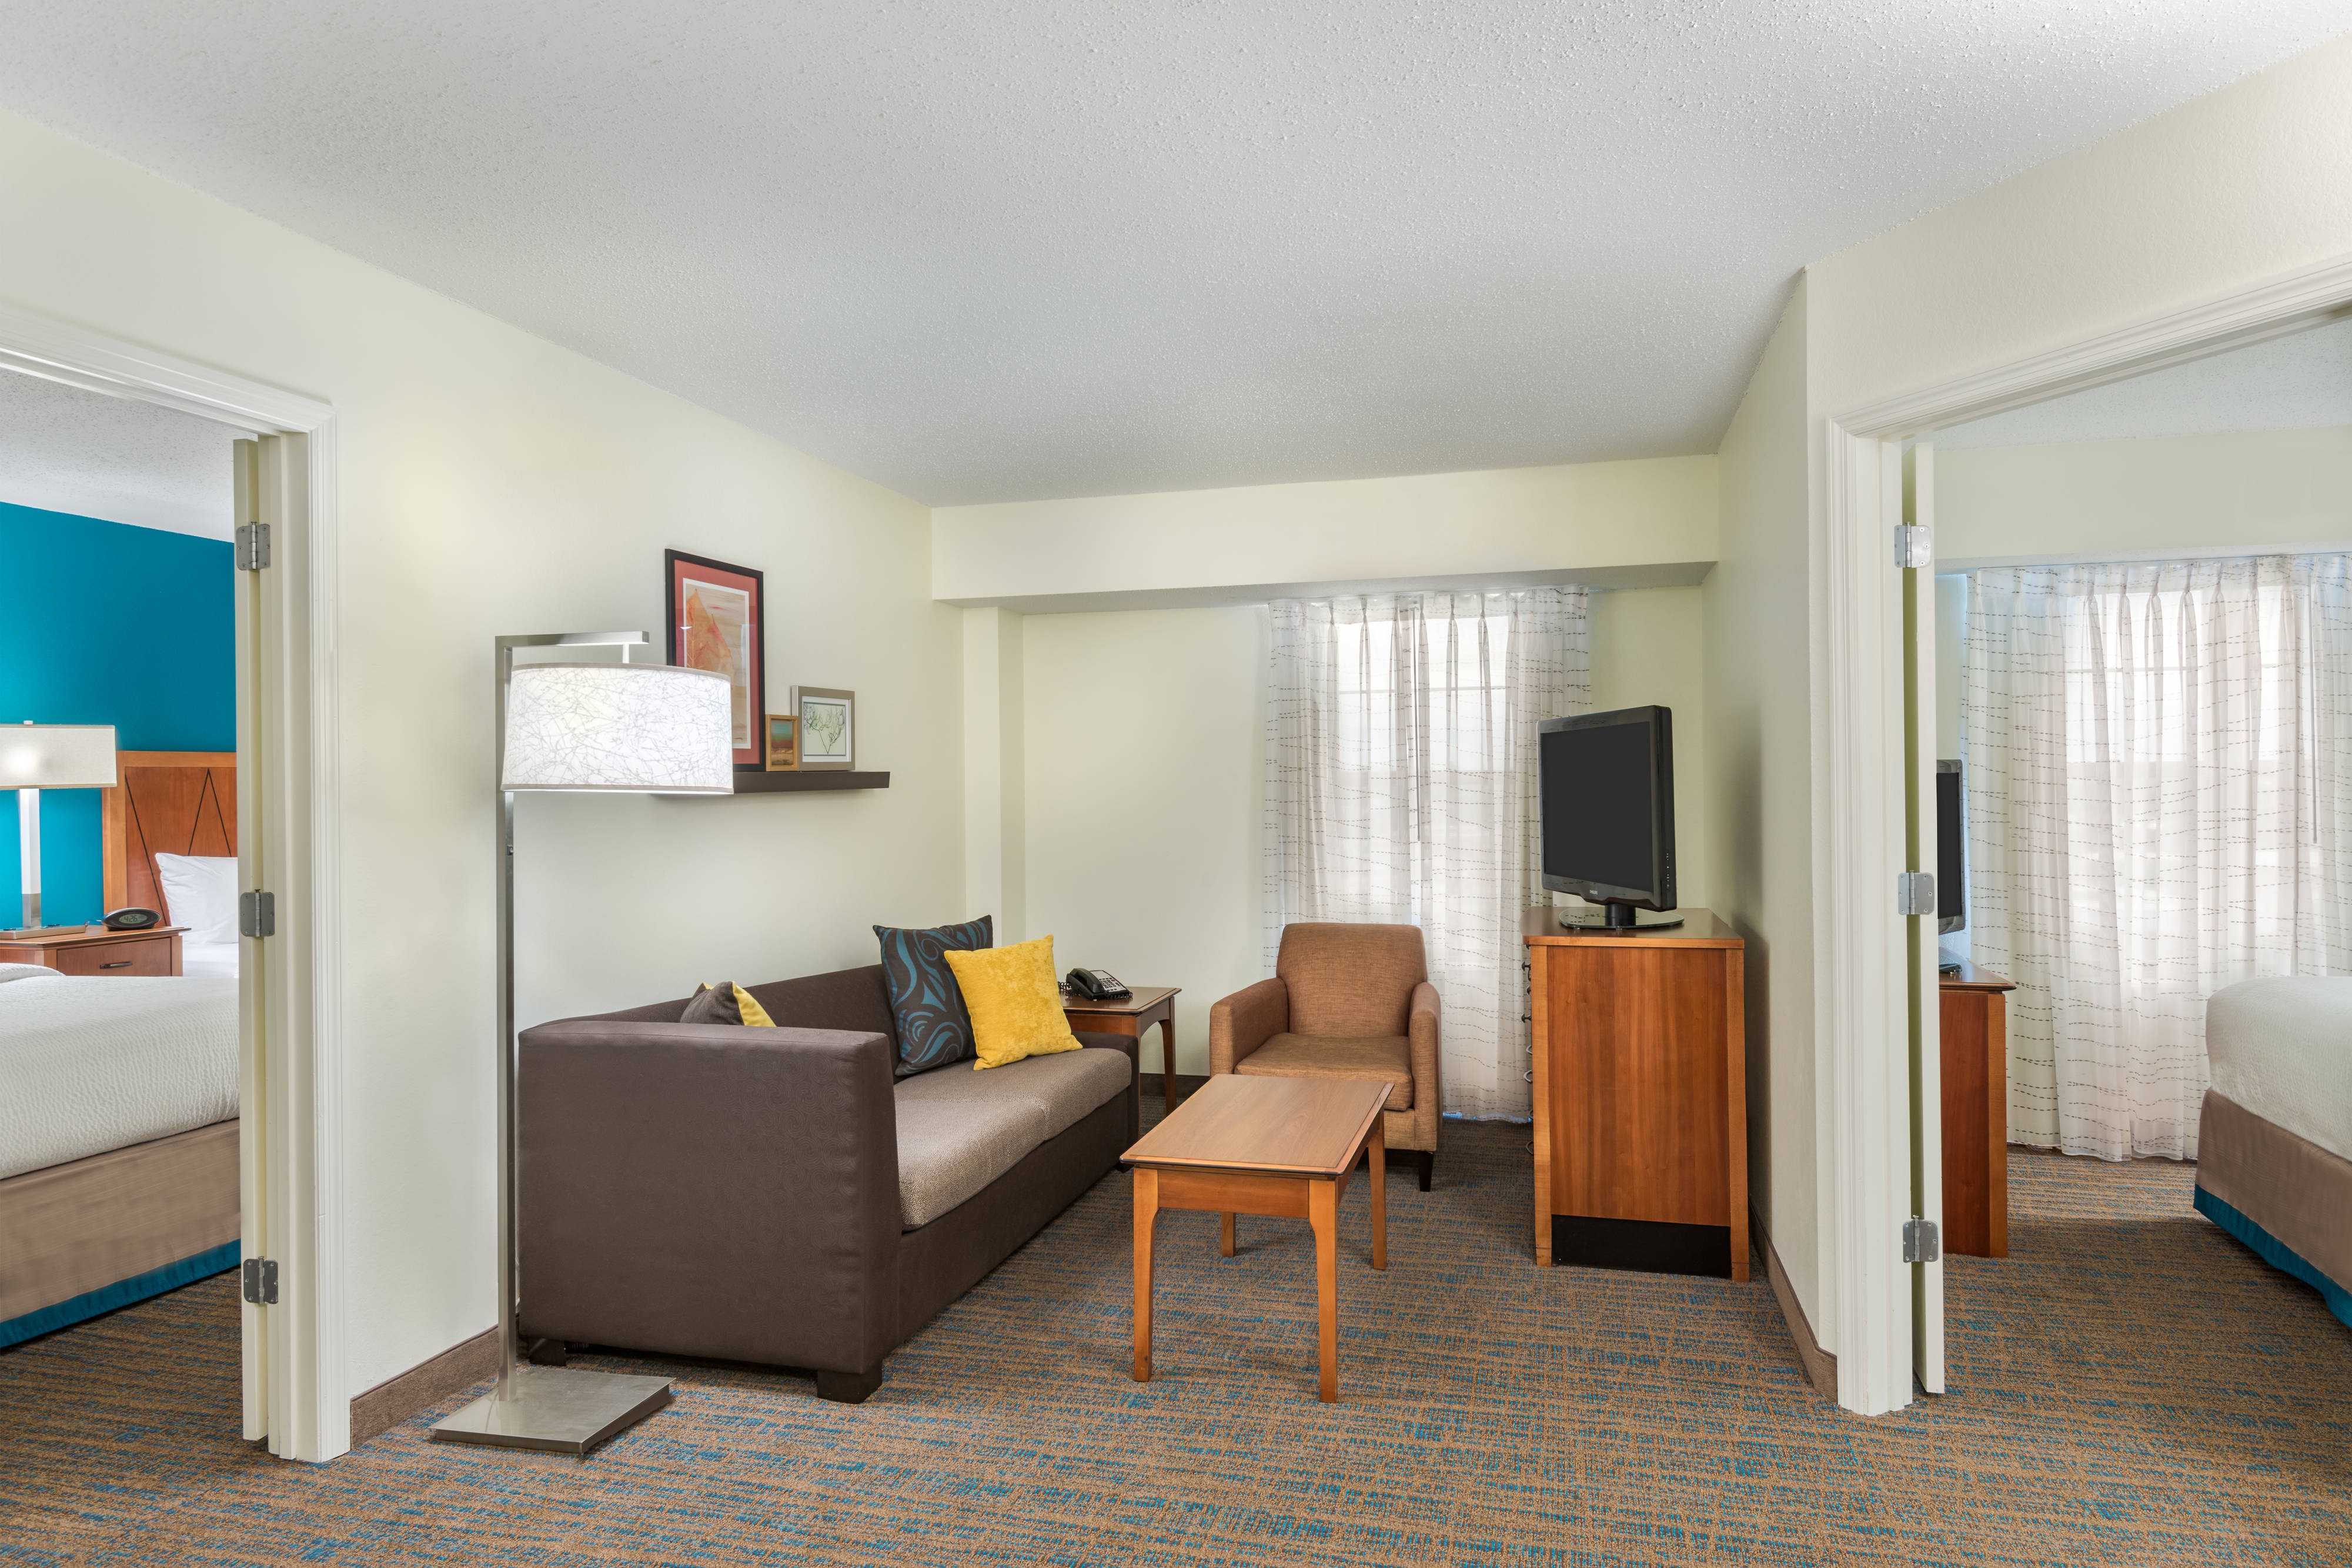 Hotel Rooms & Amenities | Residence Inn St. Louis Downtown